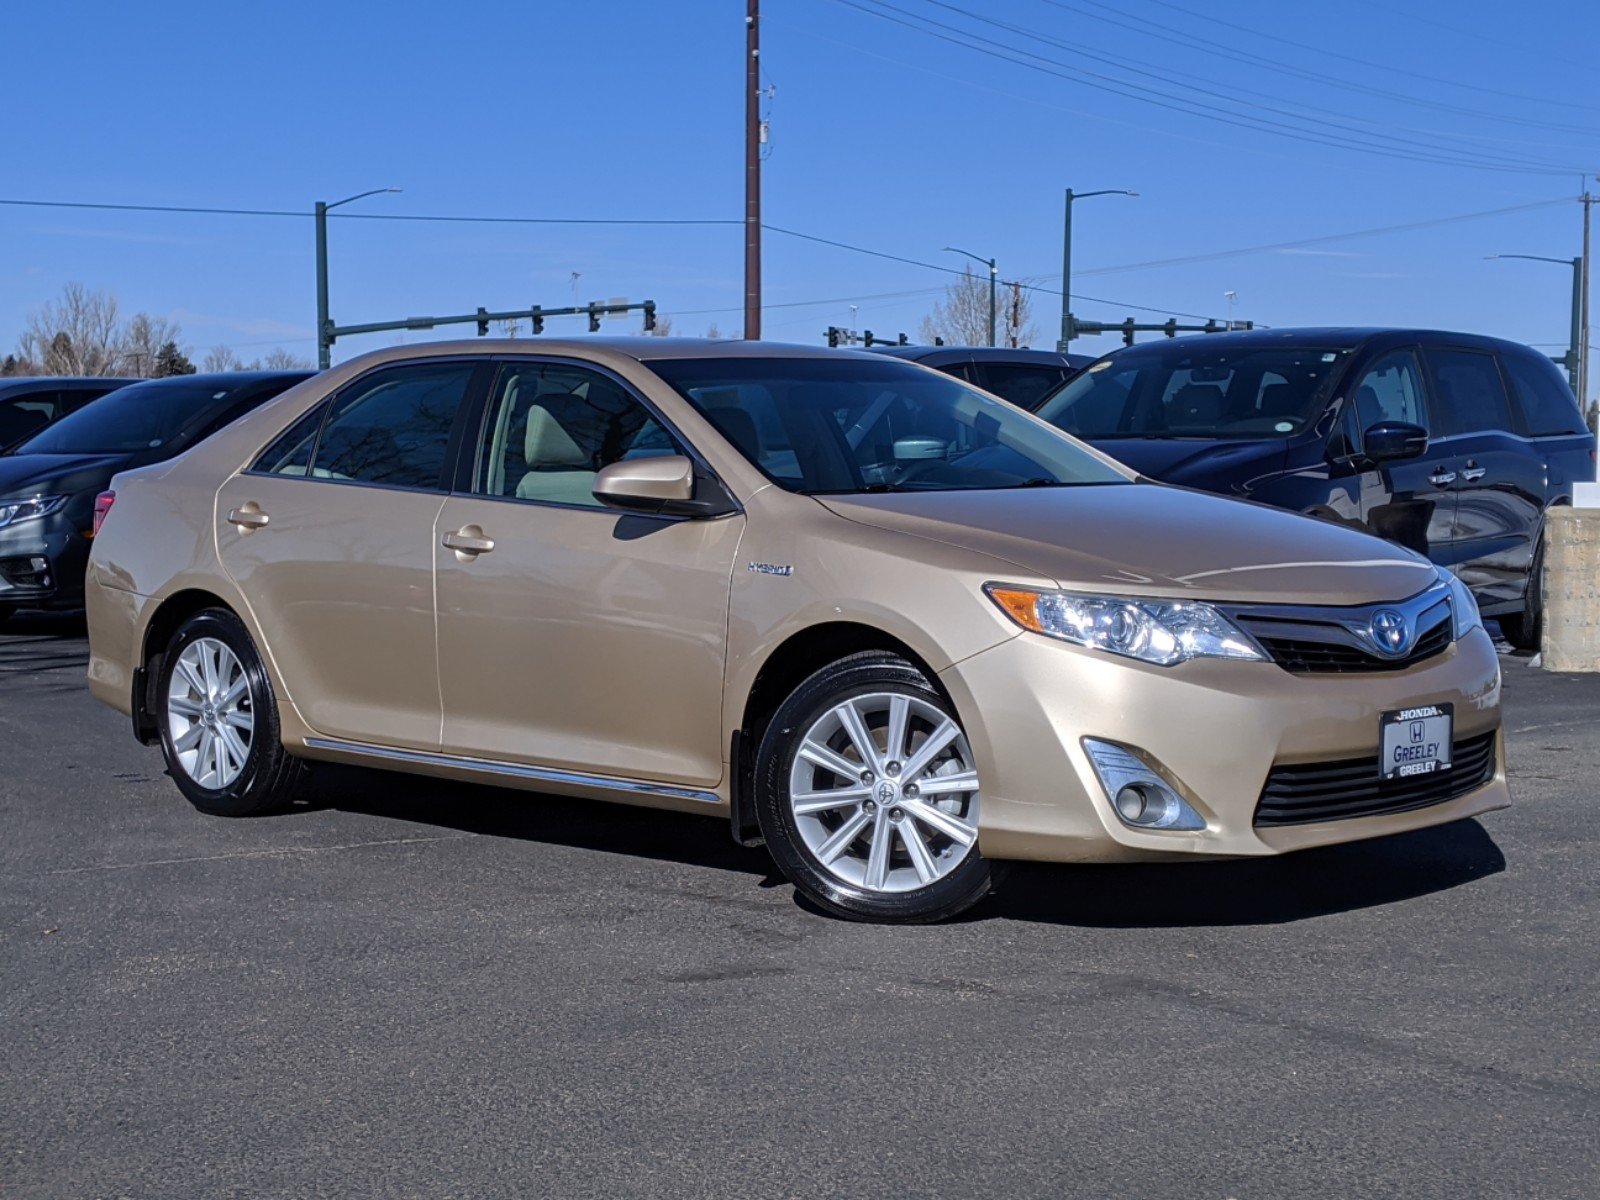 Pre-Owned 2012 Toyota Camry Hybrid XLE 4dr Car in Greeley #19H424C ...